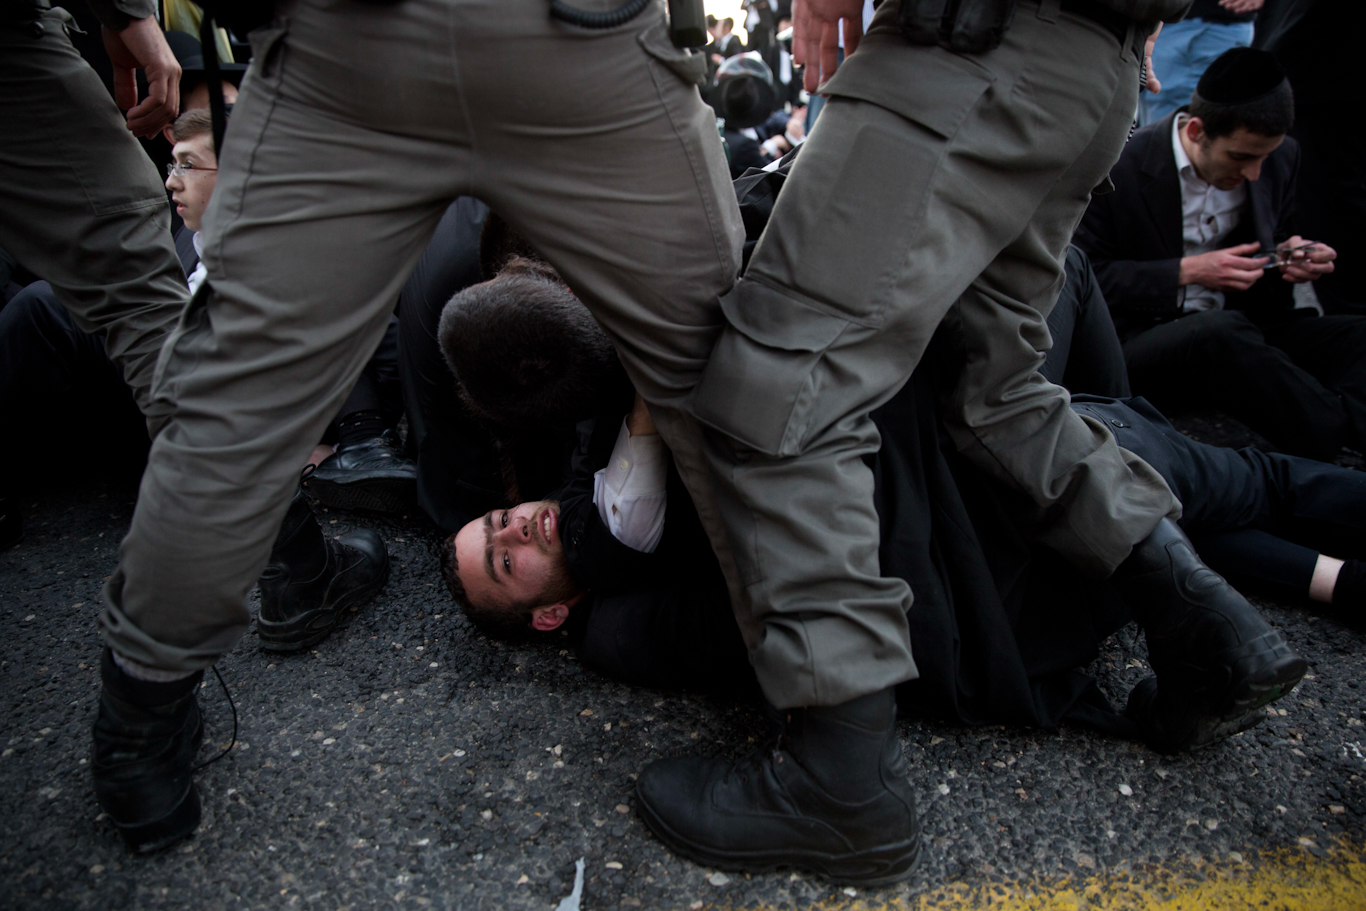 Israeli police clash with ultra-Orthodox men protesting the arrest of a person who refused military service in Bnei Brak, Israel, March 12, 2018. Oded Balilty | AP